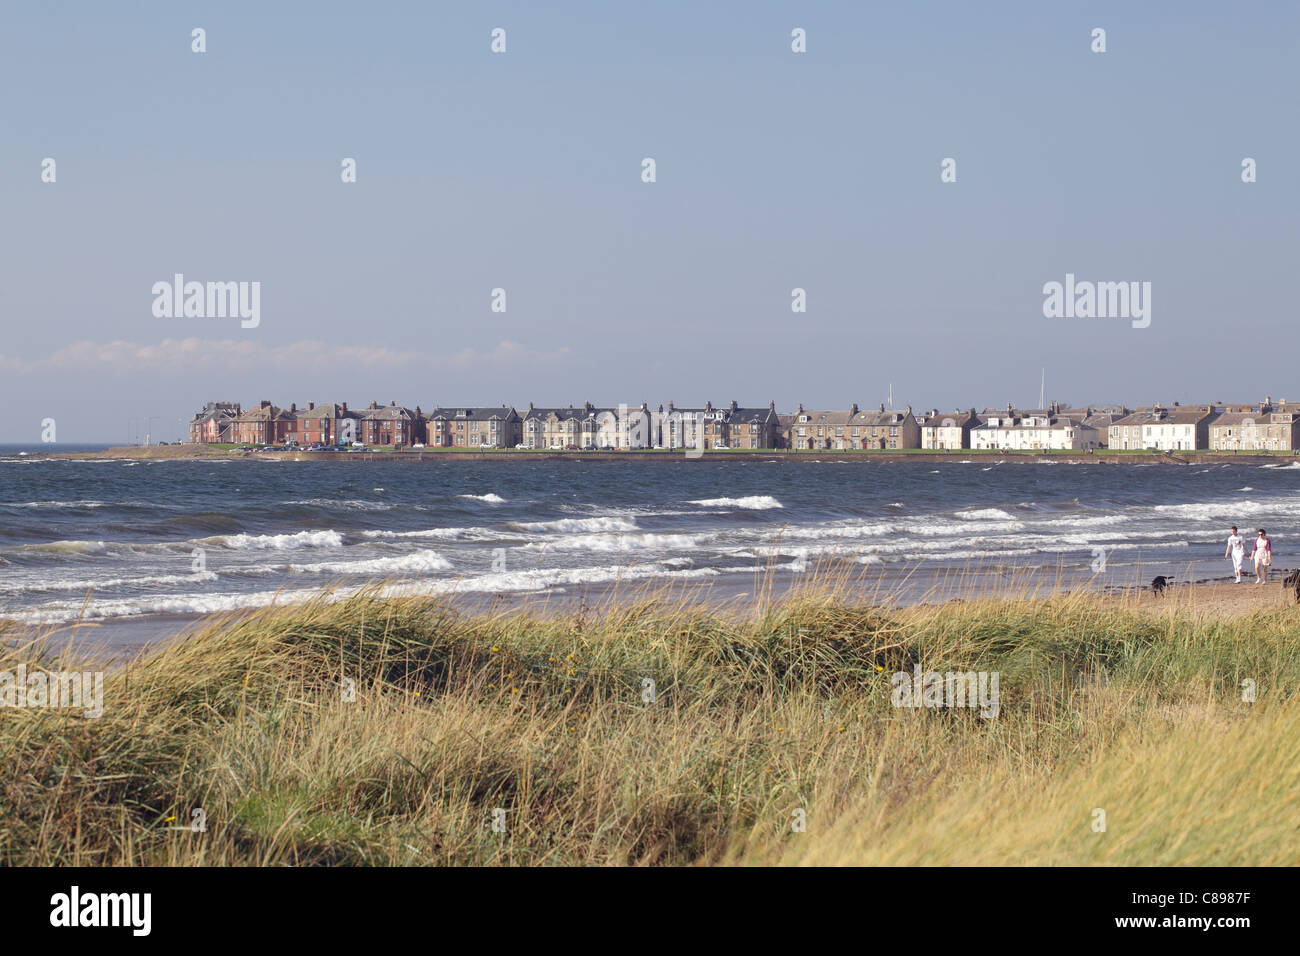 South Beach in the seaside town of Troon, Ayrshire, Scotland, UK Stock Photo